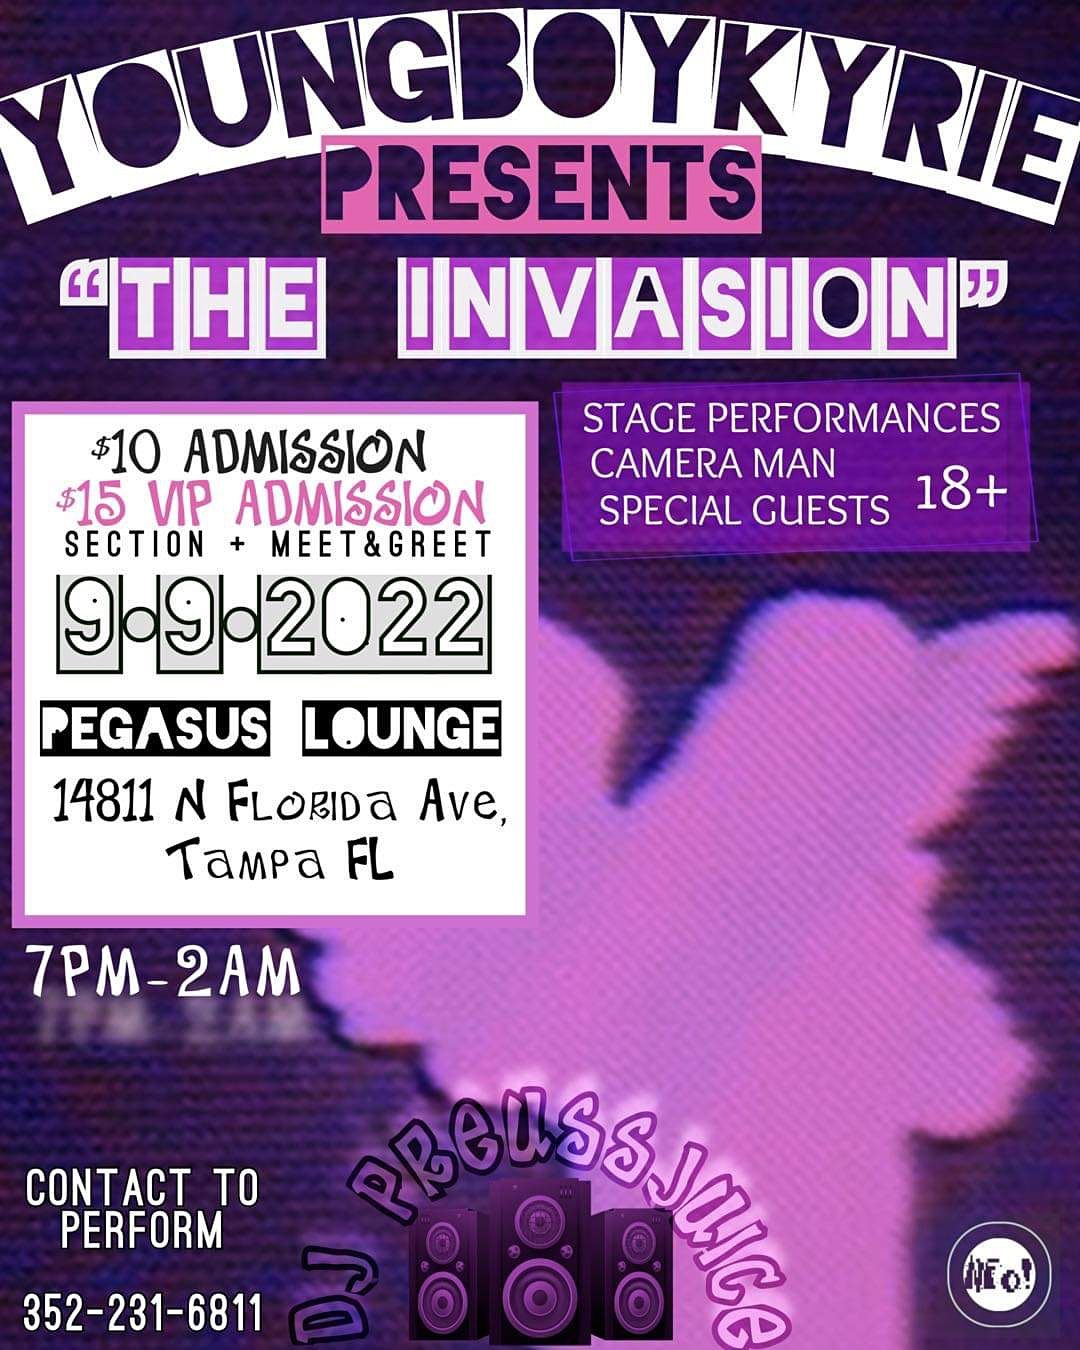 Youngboykyrie Presents The Invasion